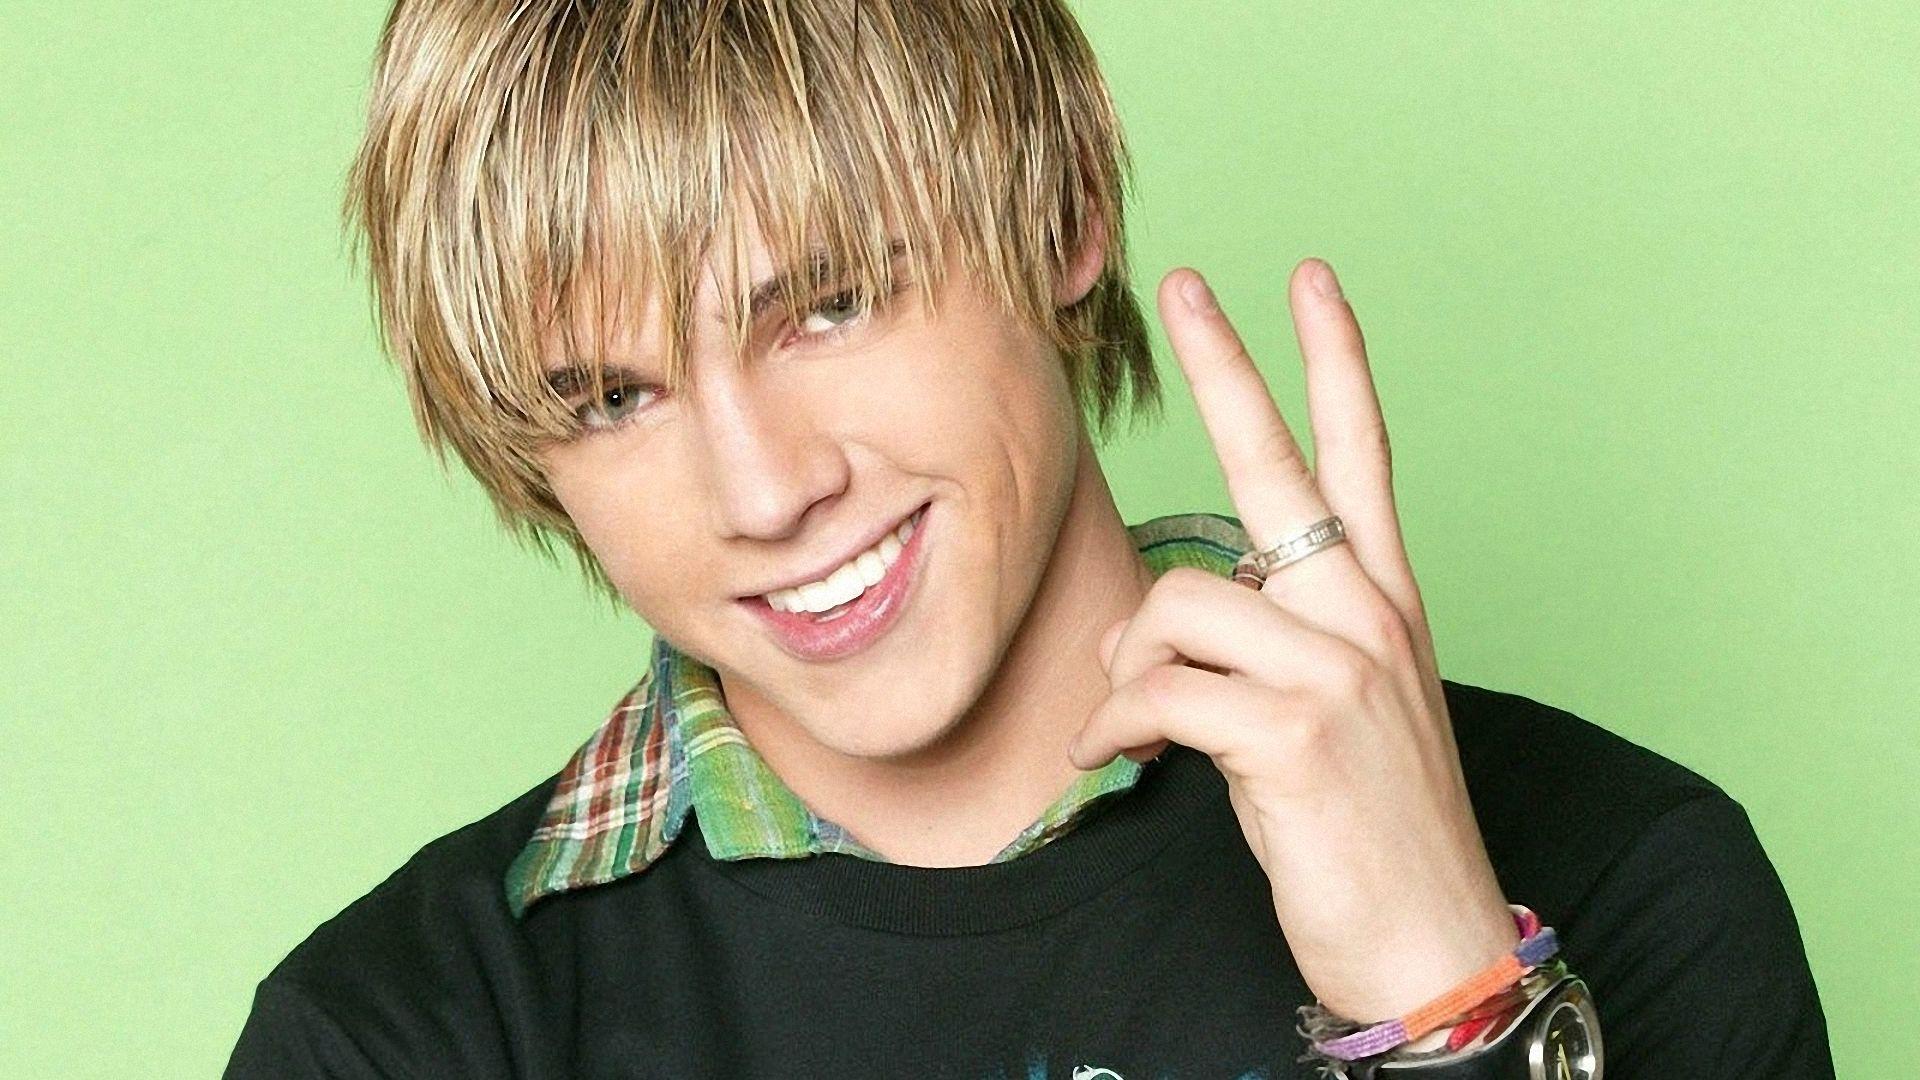 image For > Jesse Mccartney Keith Wallpaper